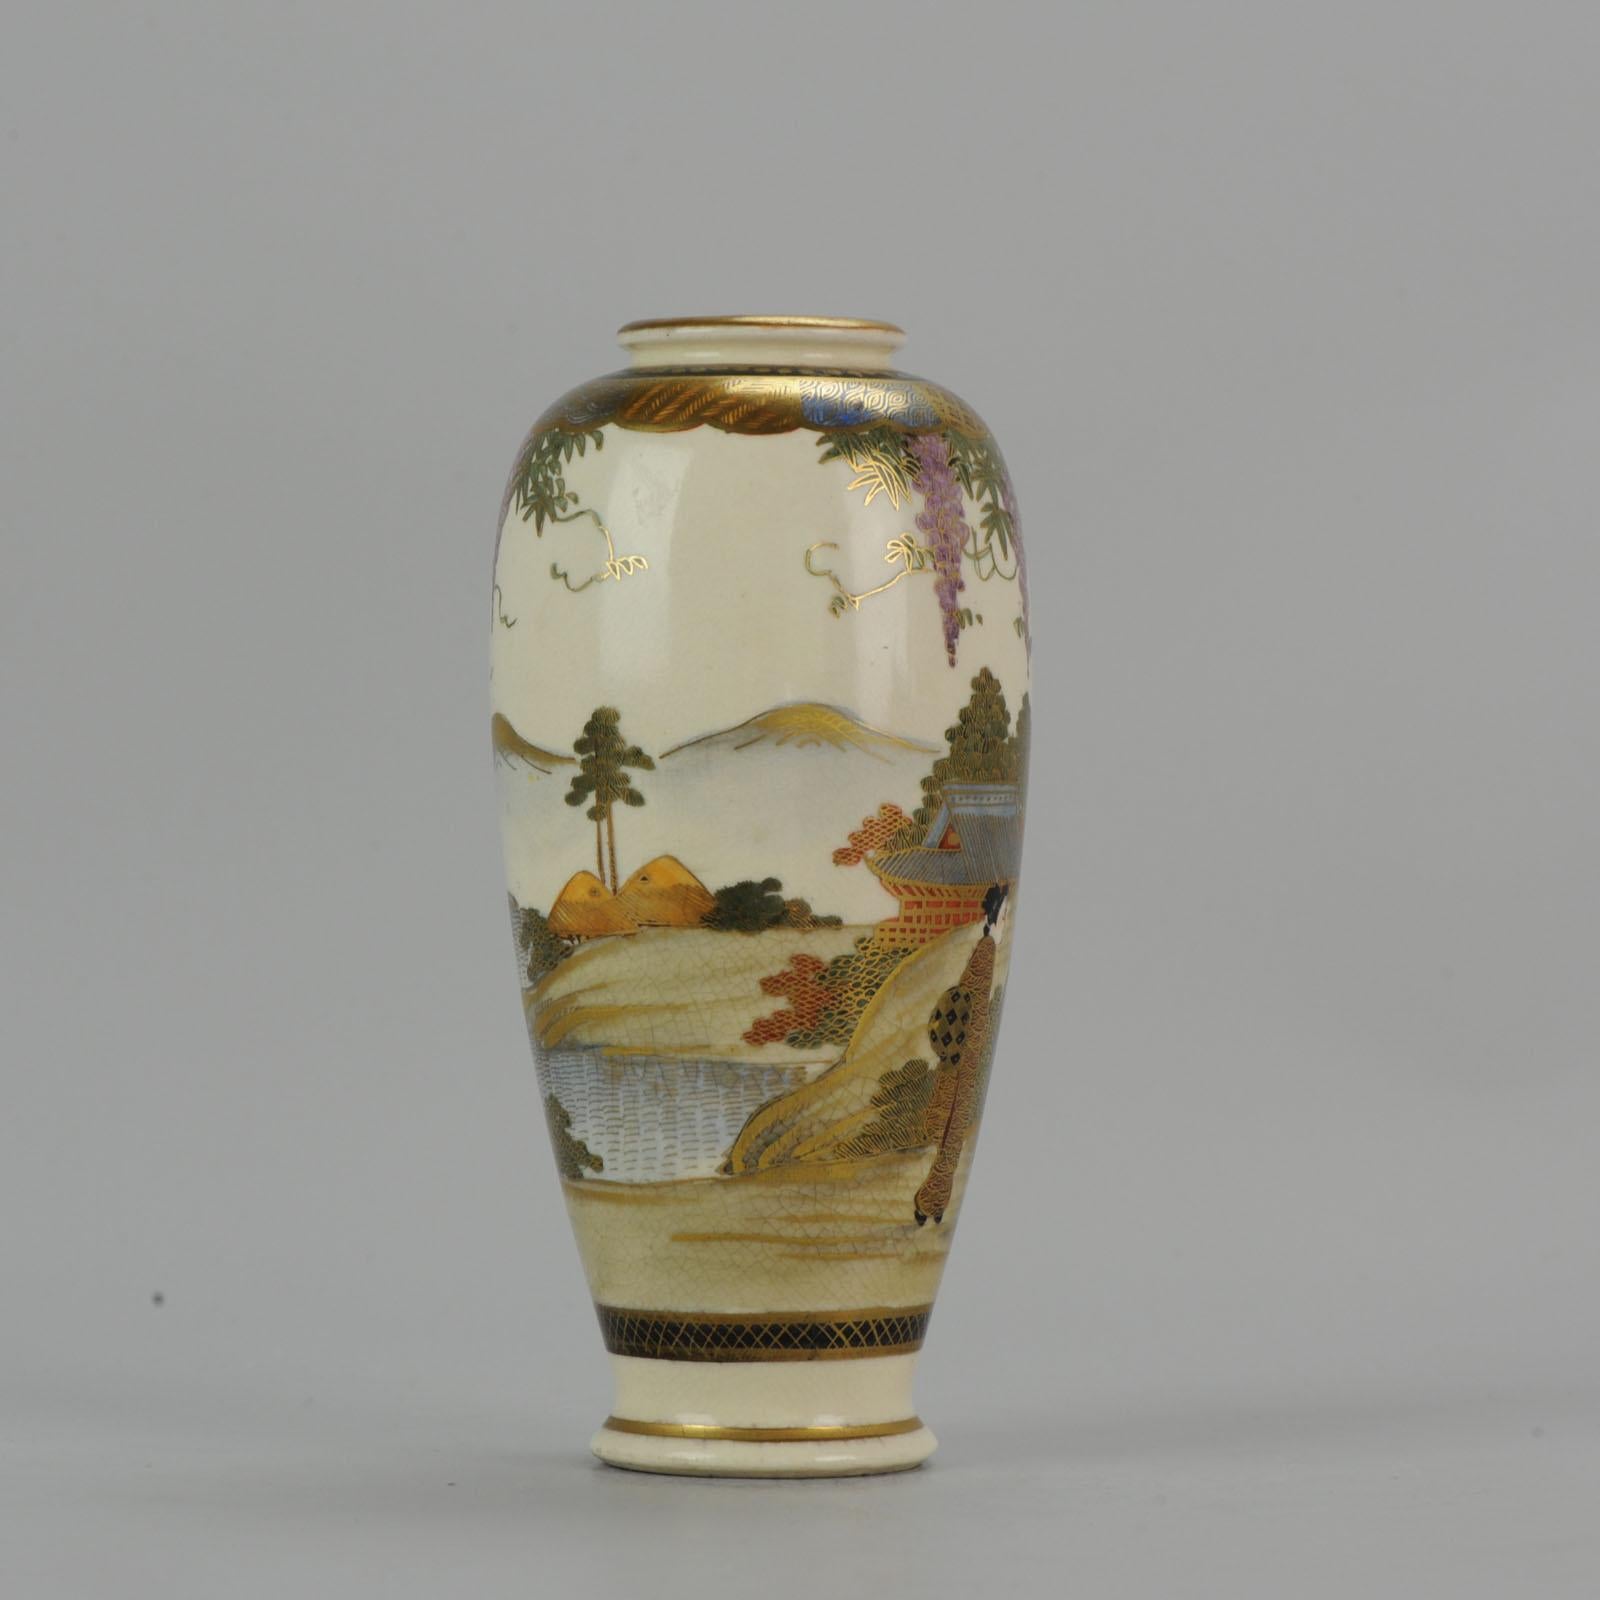 Lovely detailed piece. Marked on base.

Additional information:
Material: Porcelain & Pottery
Type: Vase
Region of Origin: Japan
Period: Meiji Periode (1867-1912)
Age: ca 1900
Original/Reproduction: Original
Condition: Overall Condition almost